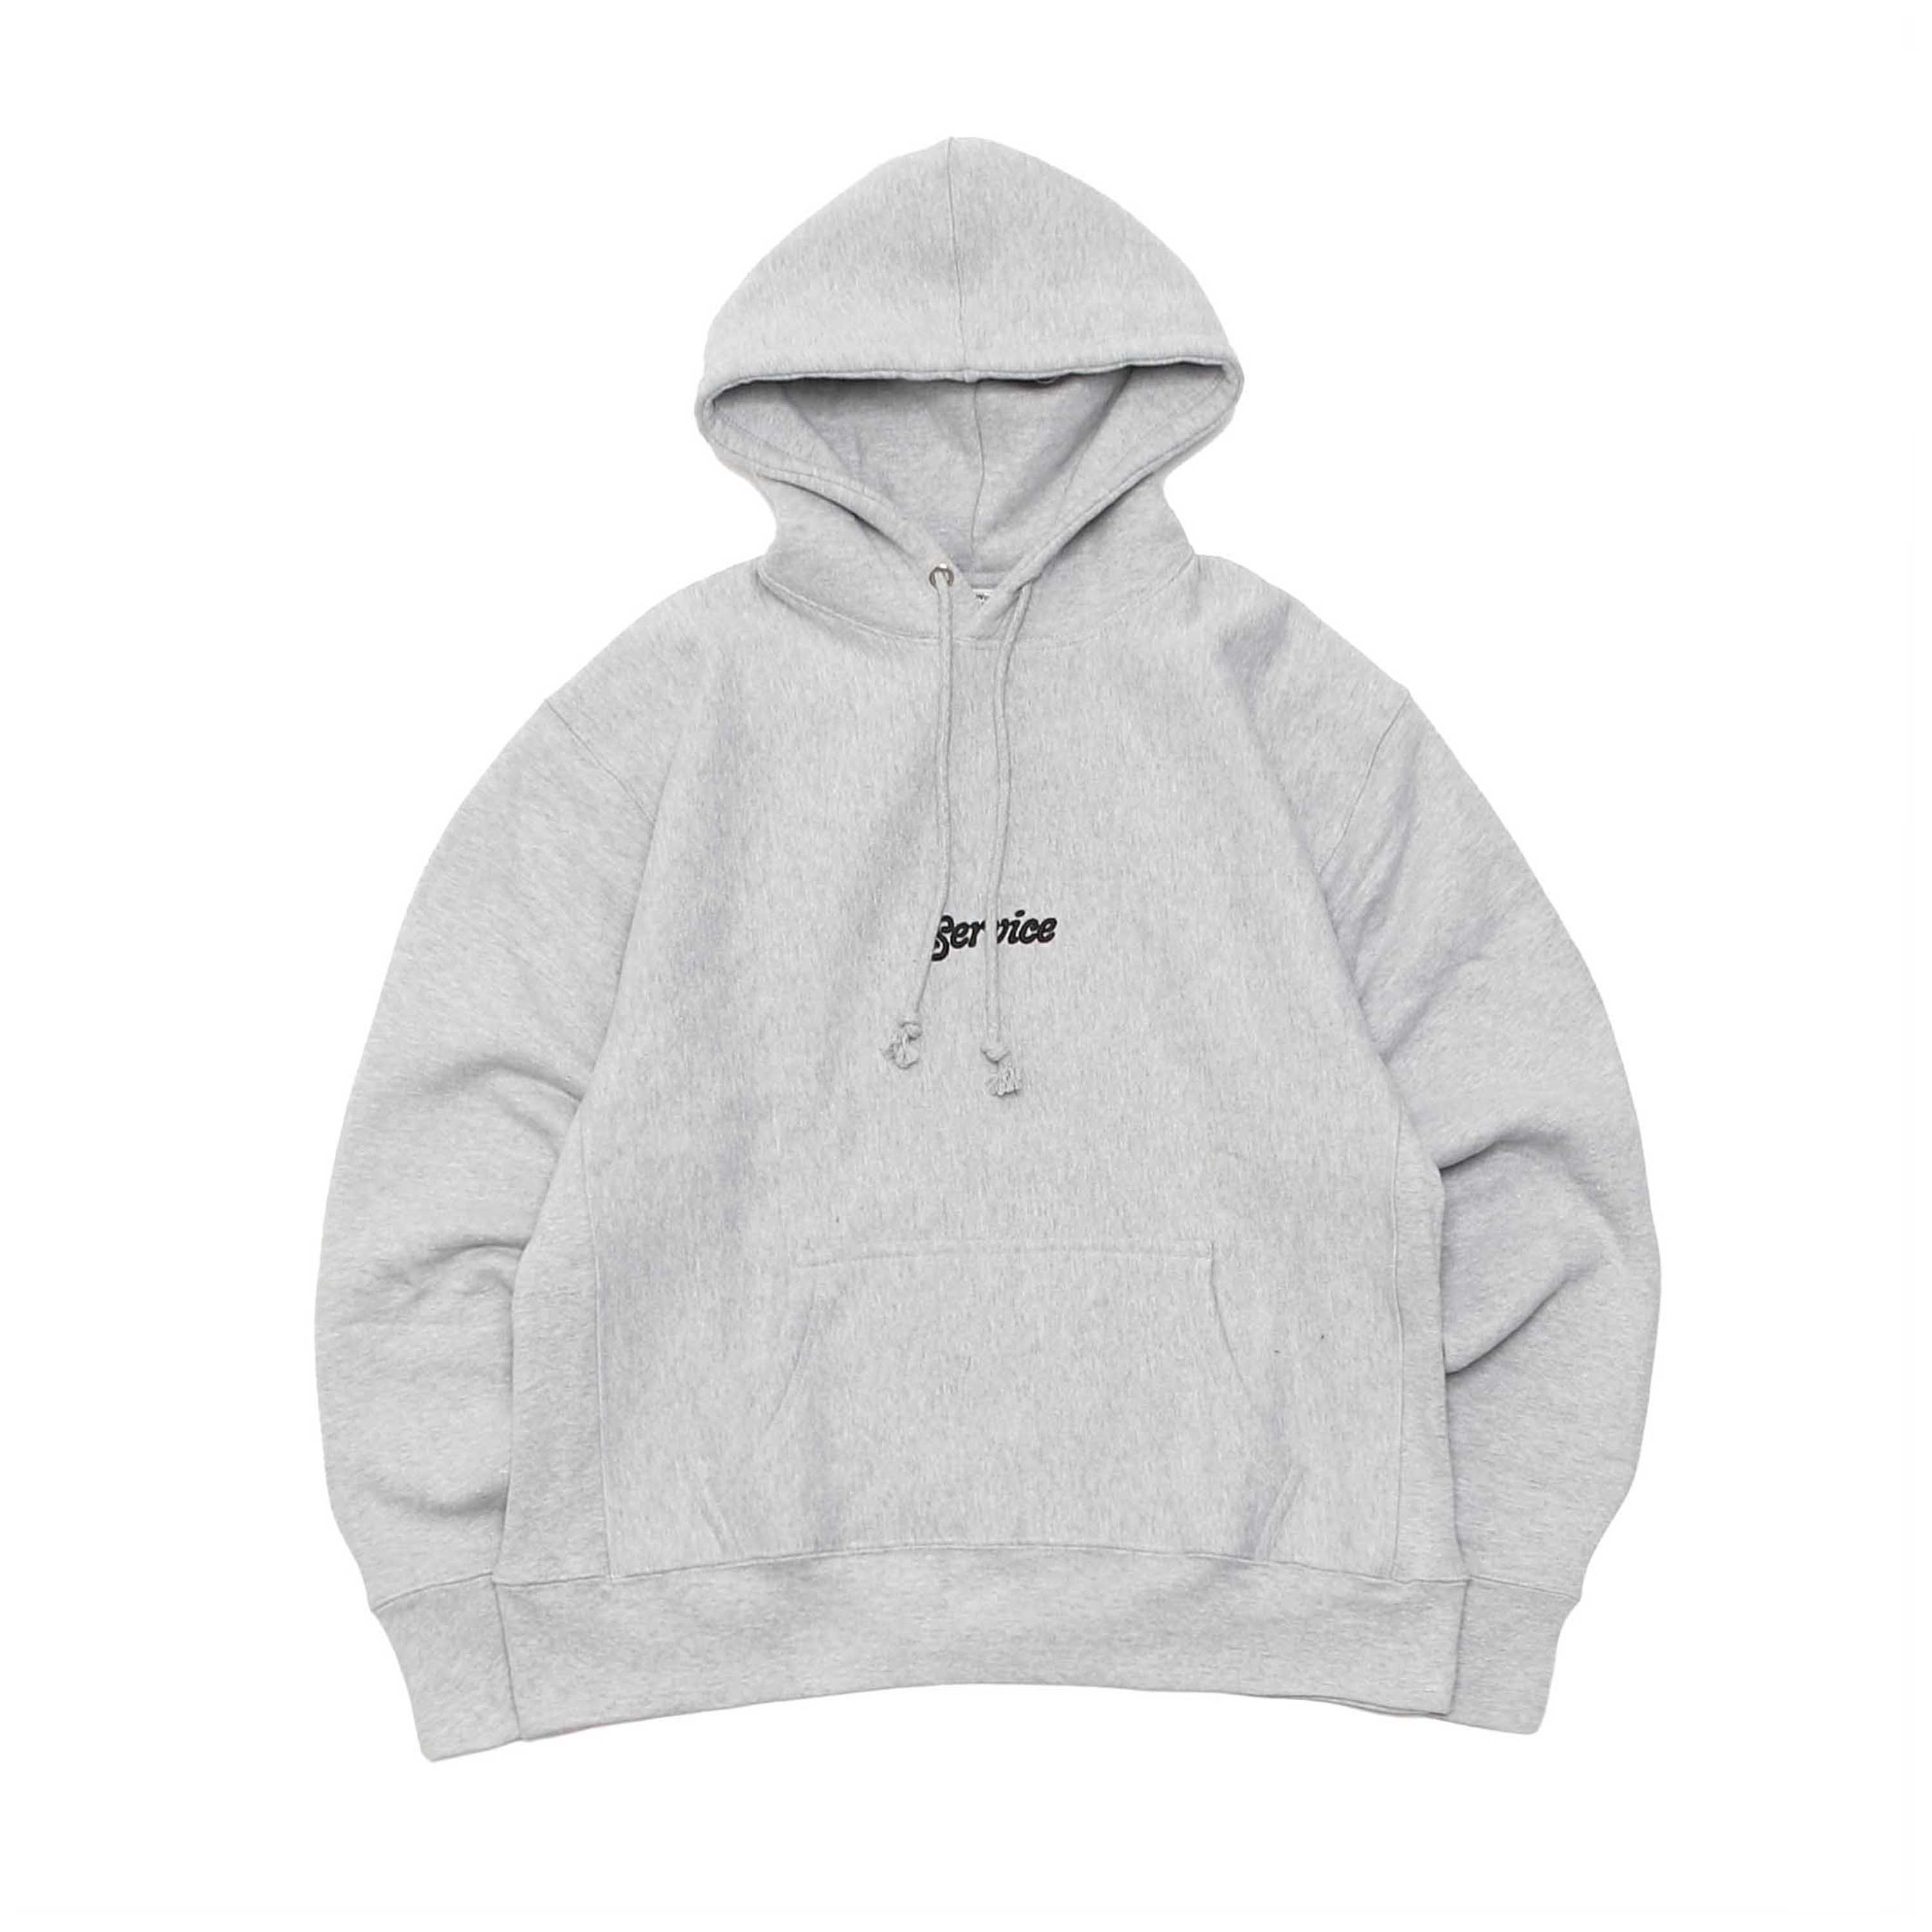 12OZ SERVICE EMBROIDERED HOODIE - GRAY